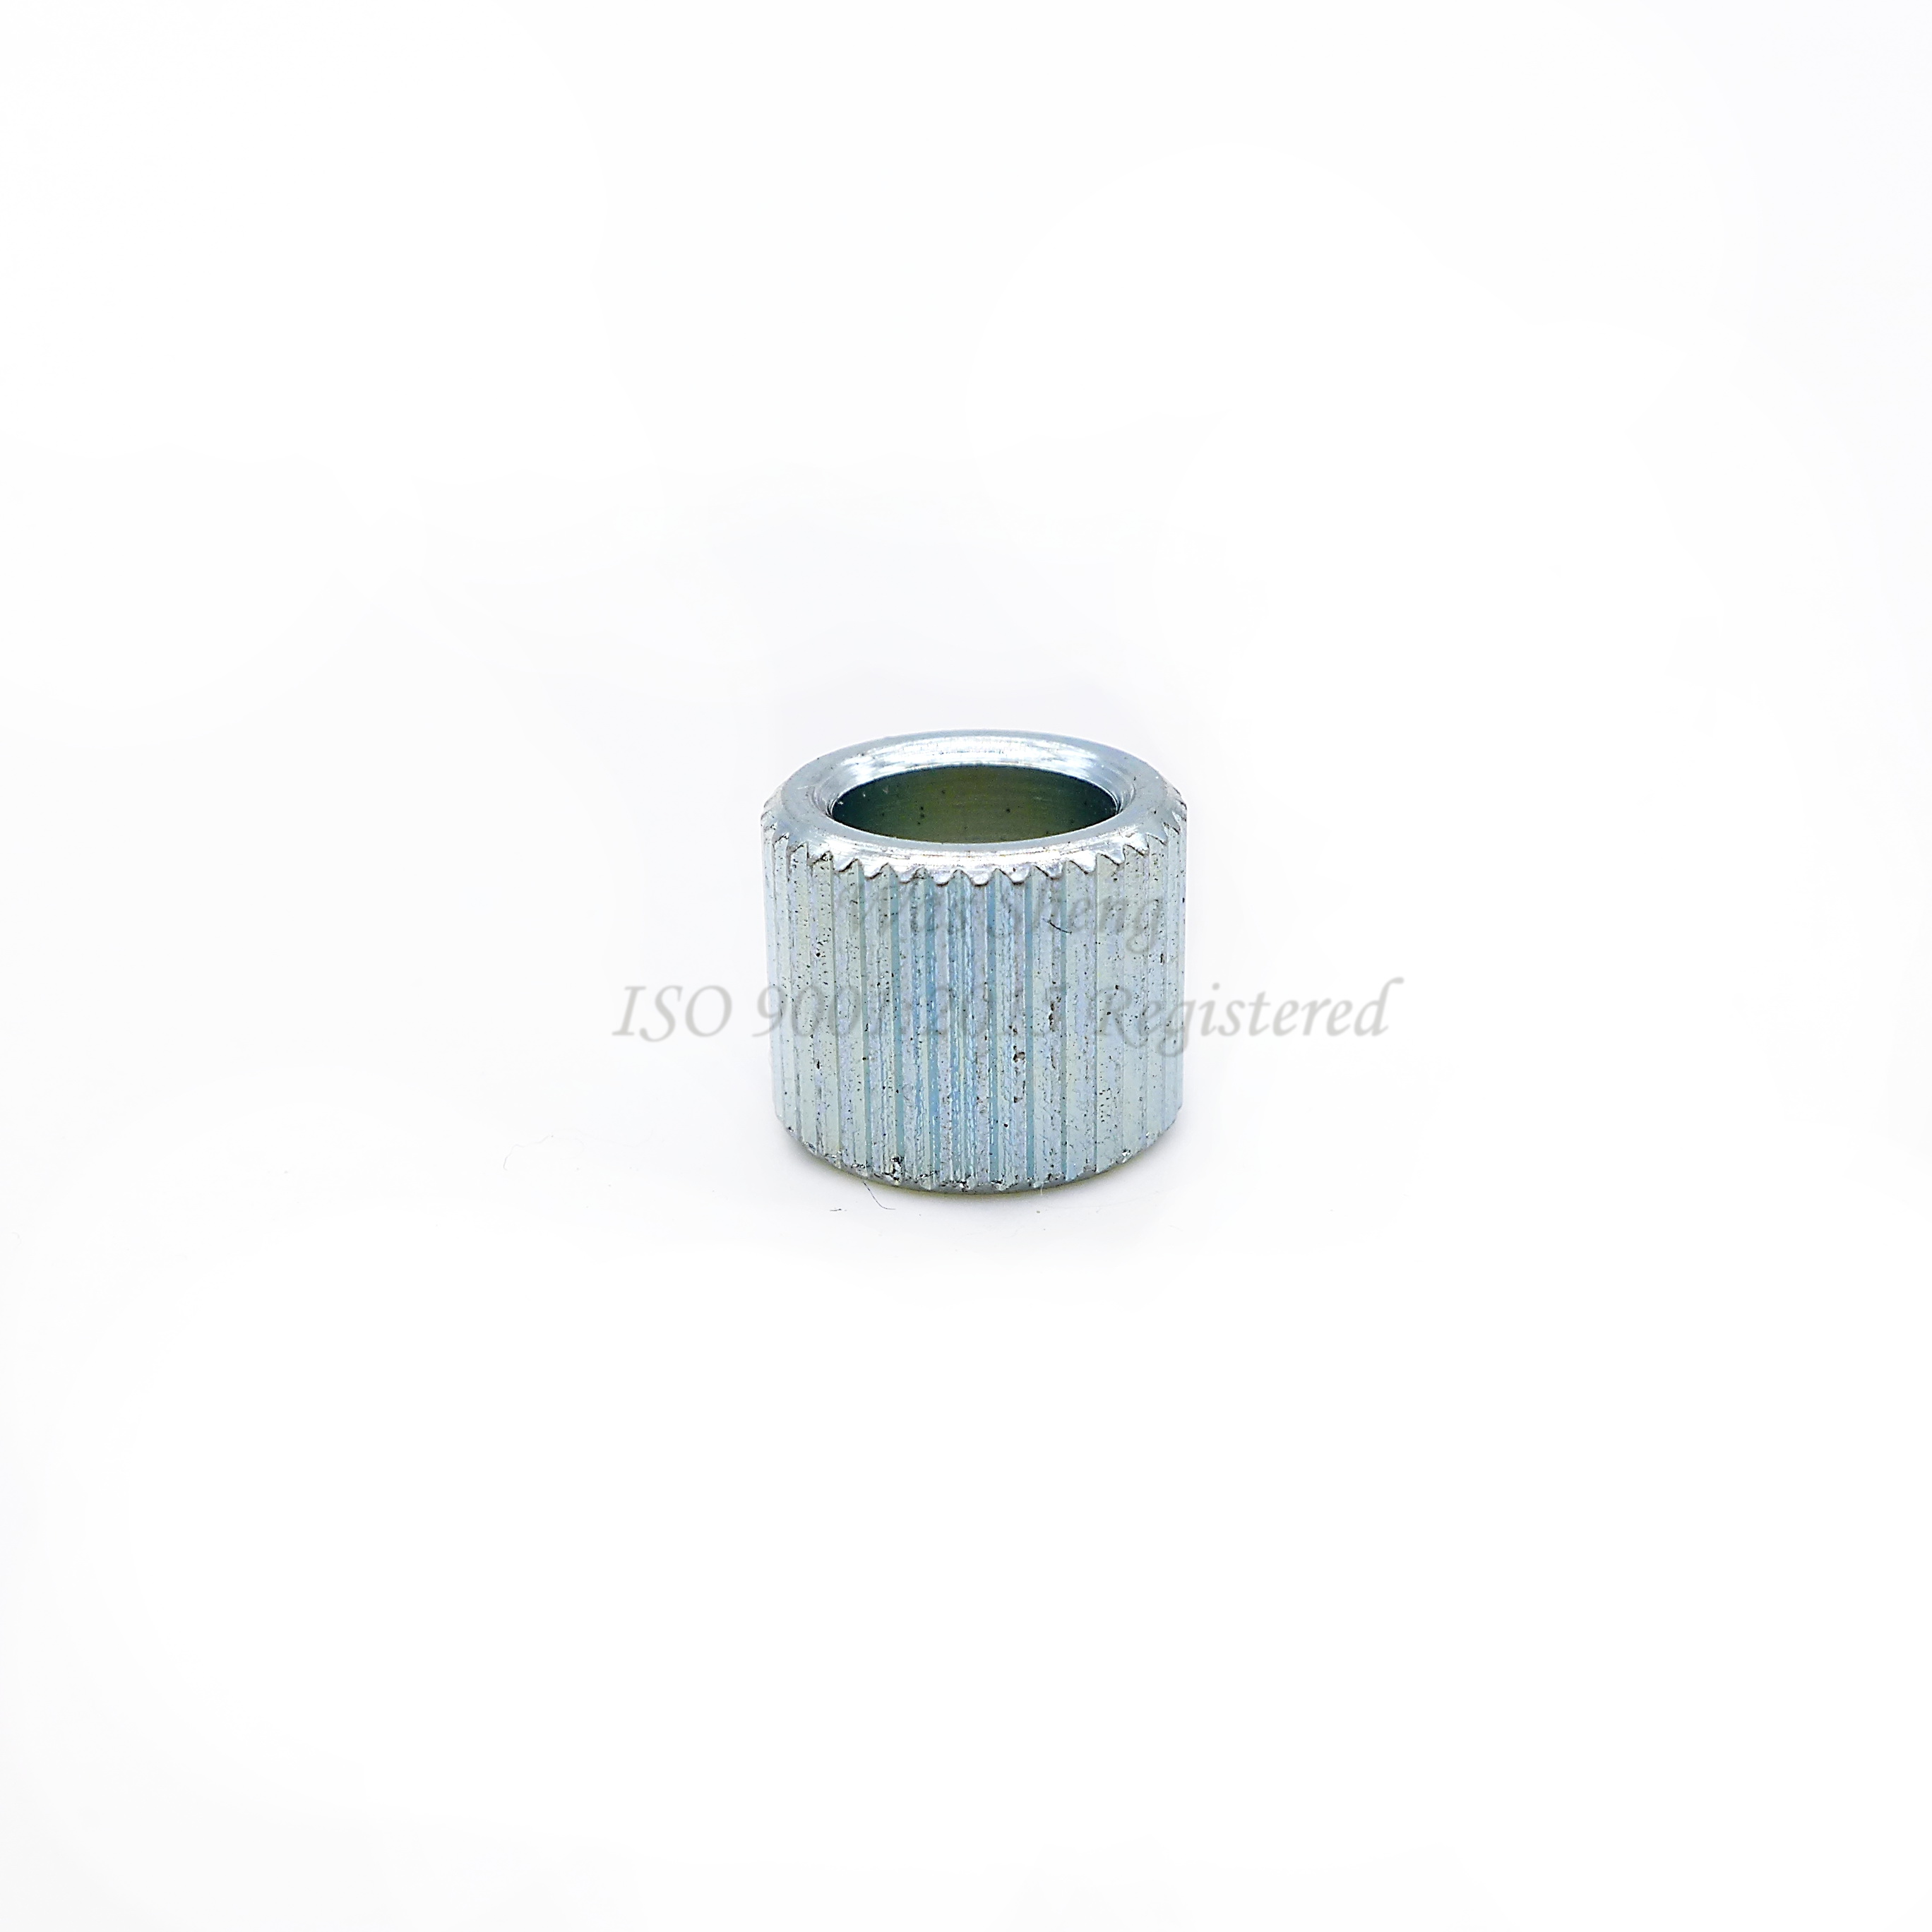 Spacer Standoff Straight Knurled Collar Zinc Plating, Brass & Steel Metal  Components Manufacturing